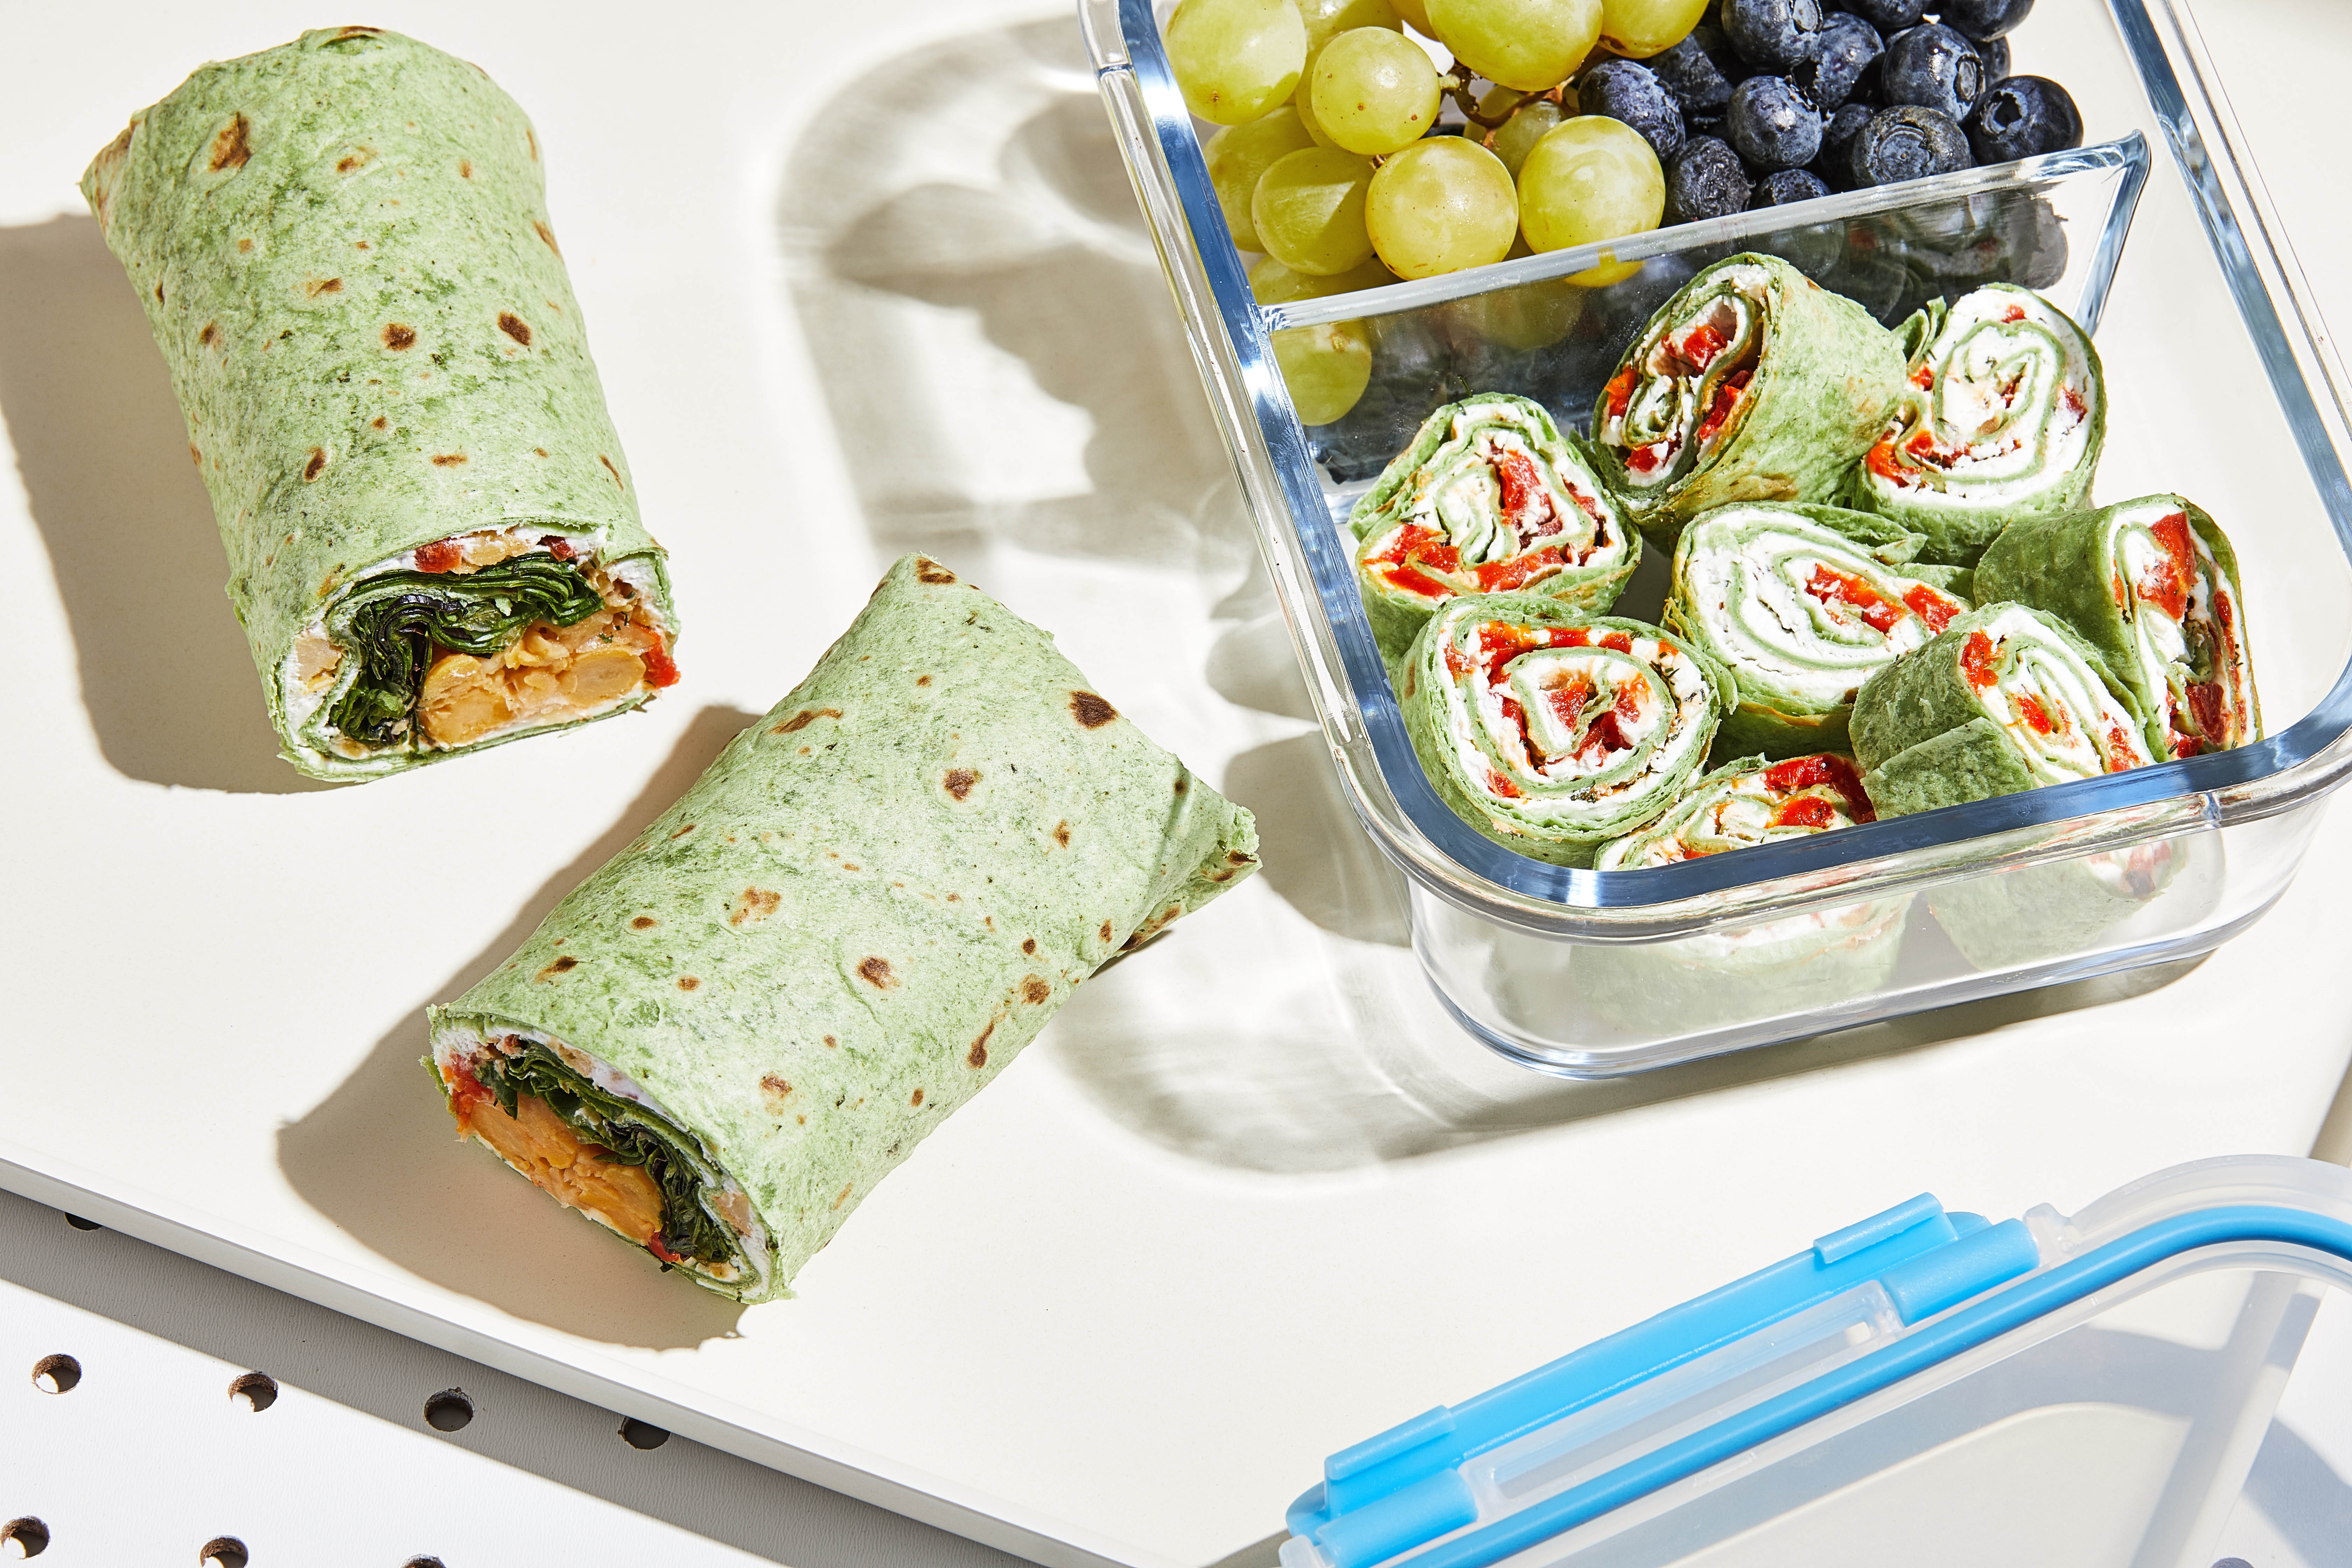 Turn tasty pinwheels for kids into a Mediterranean wrap for adults